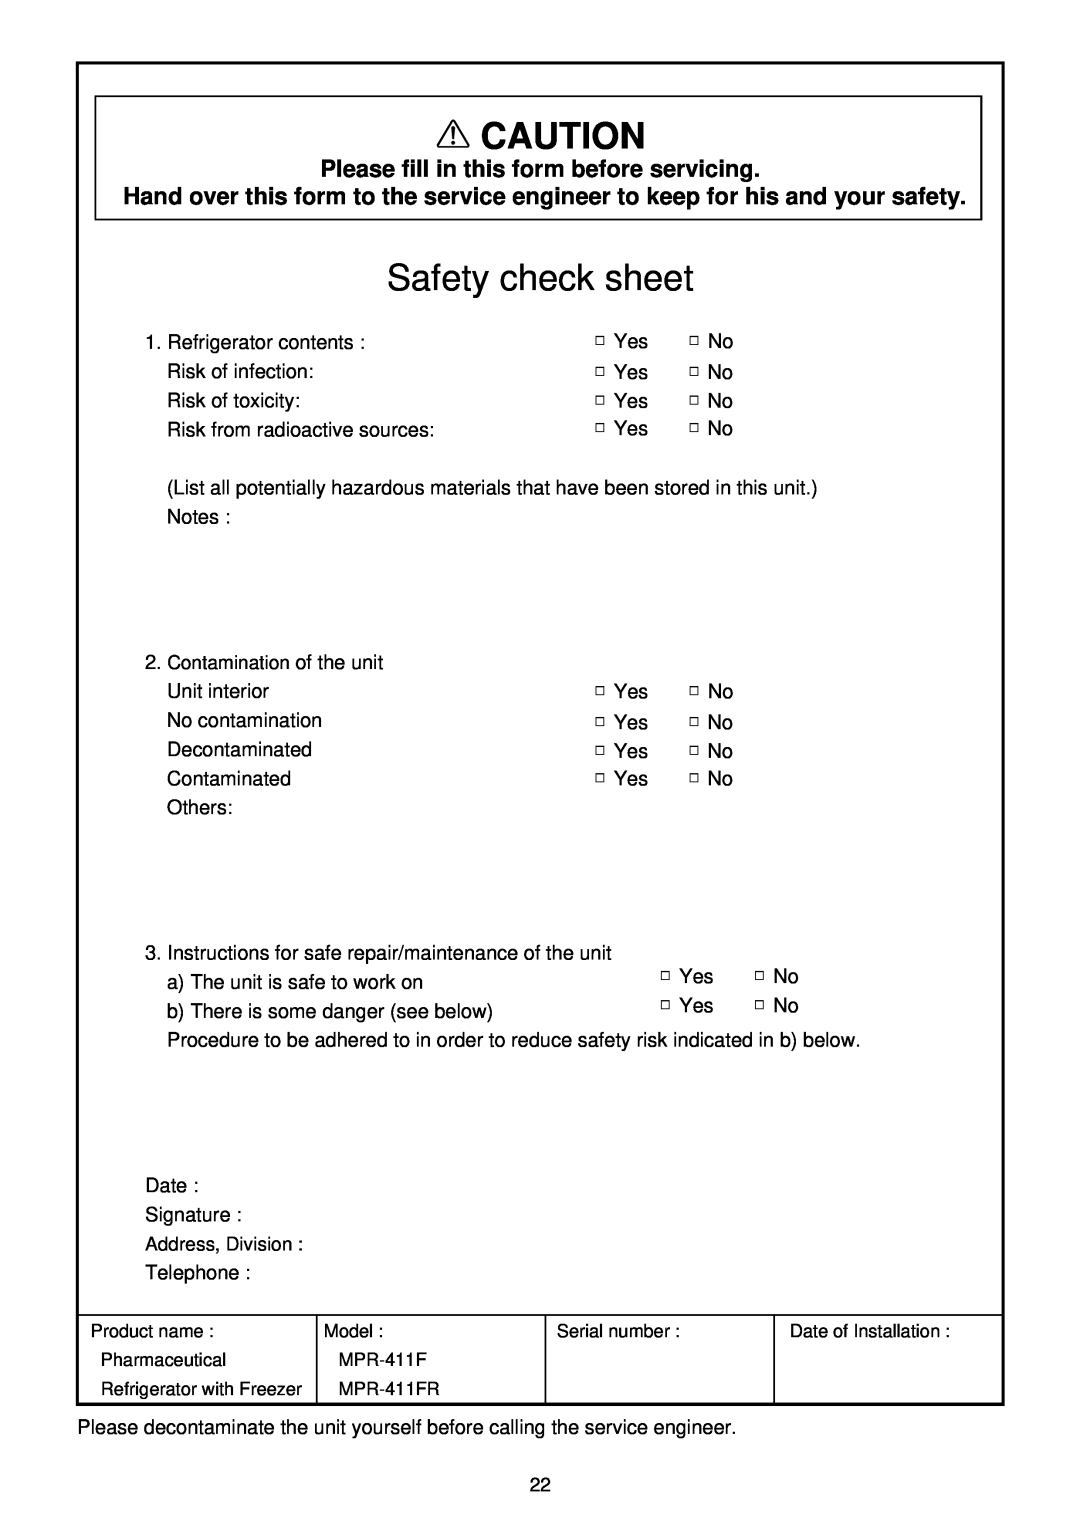 Sanyo MPR-411FR instruction manual Safety check sheet, Please fill in this form before servicing 